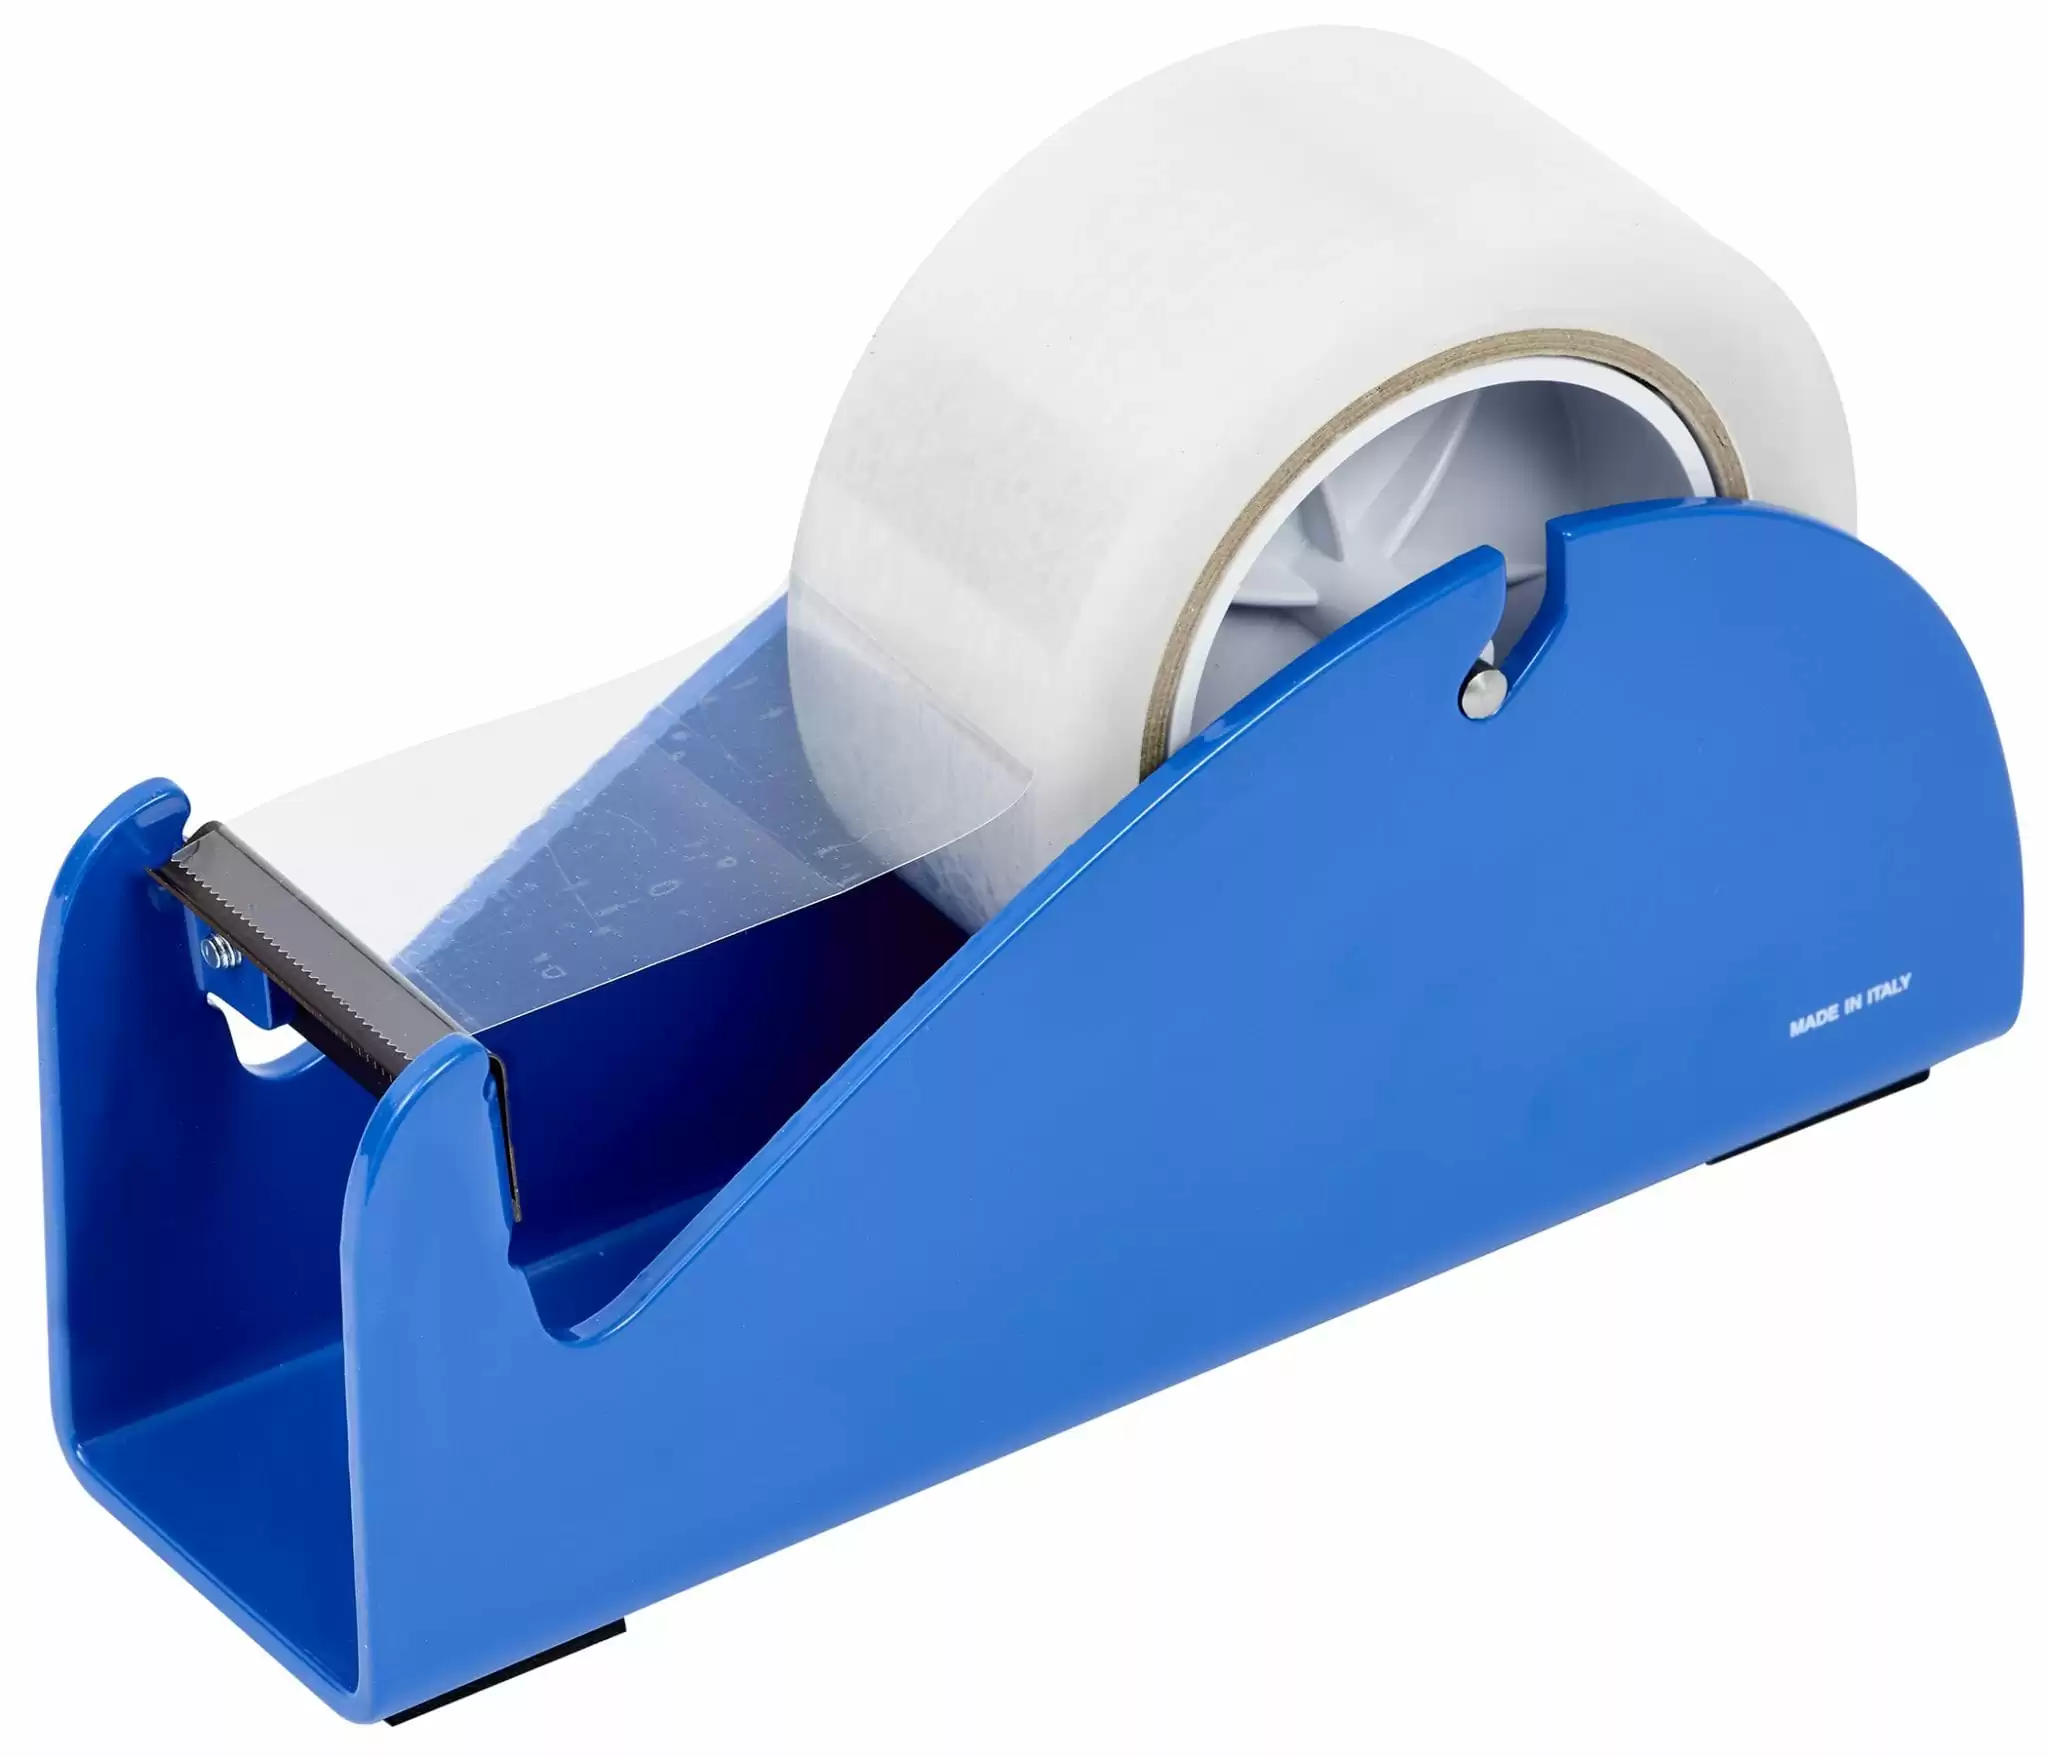 MSSC 926 Double-Face Bench Tape Dispenser, 2 Sided Mounted